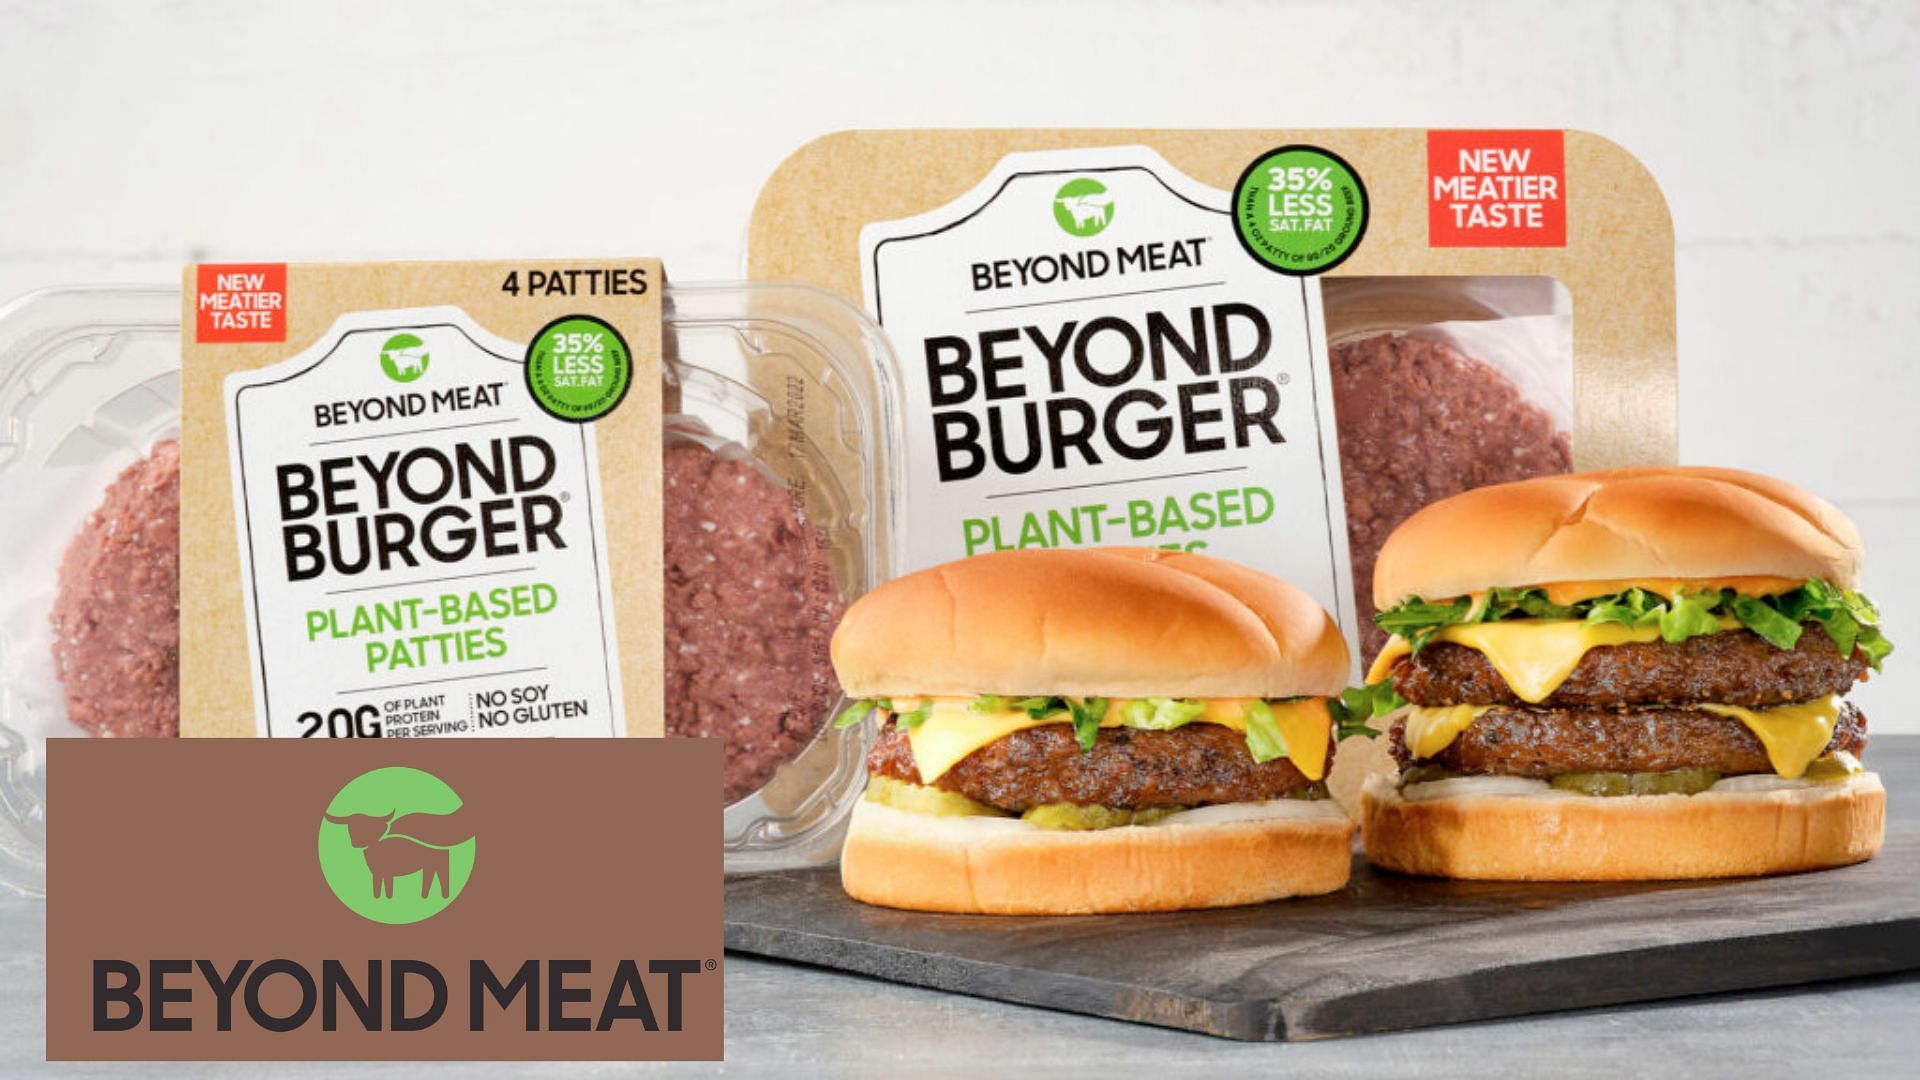 Leaked documents show Beyond Meat facility in food safety breach (image via Beyond Meat)